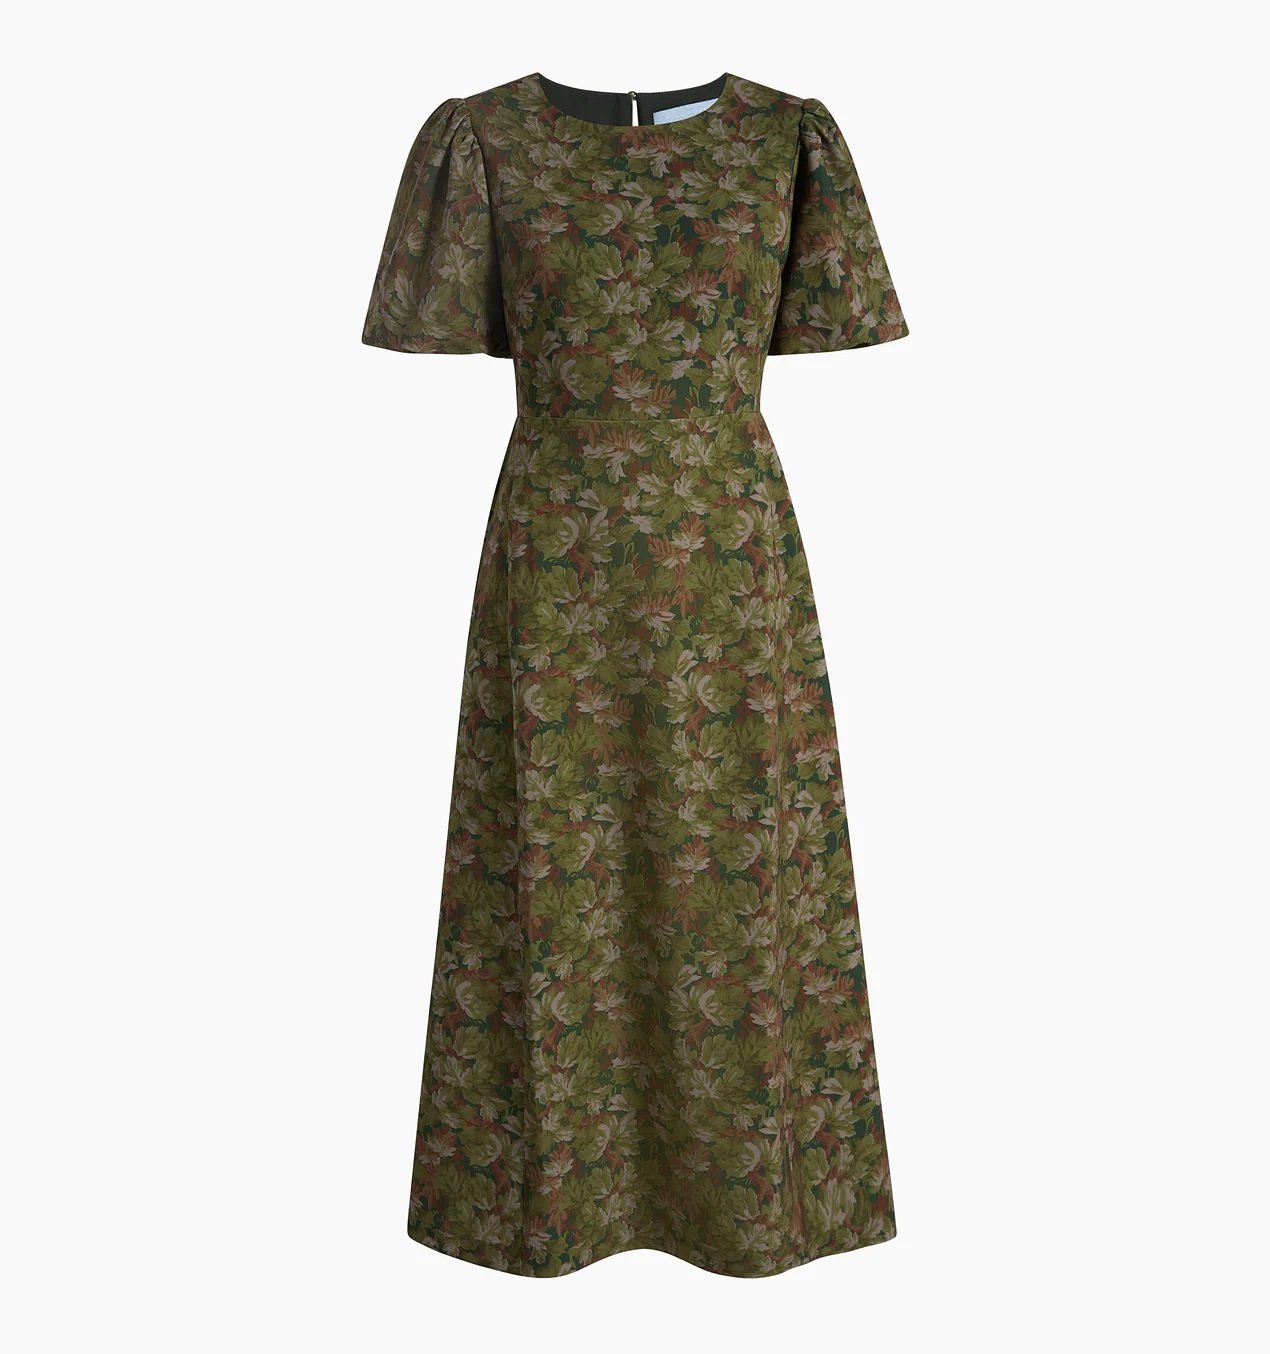 Hill House The Constance Dress in Foliage.jpg